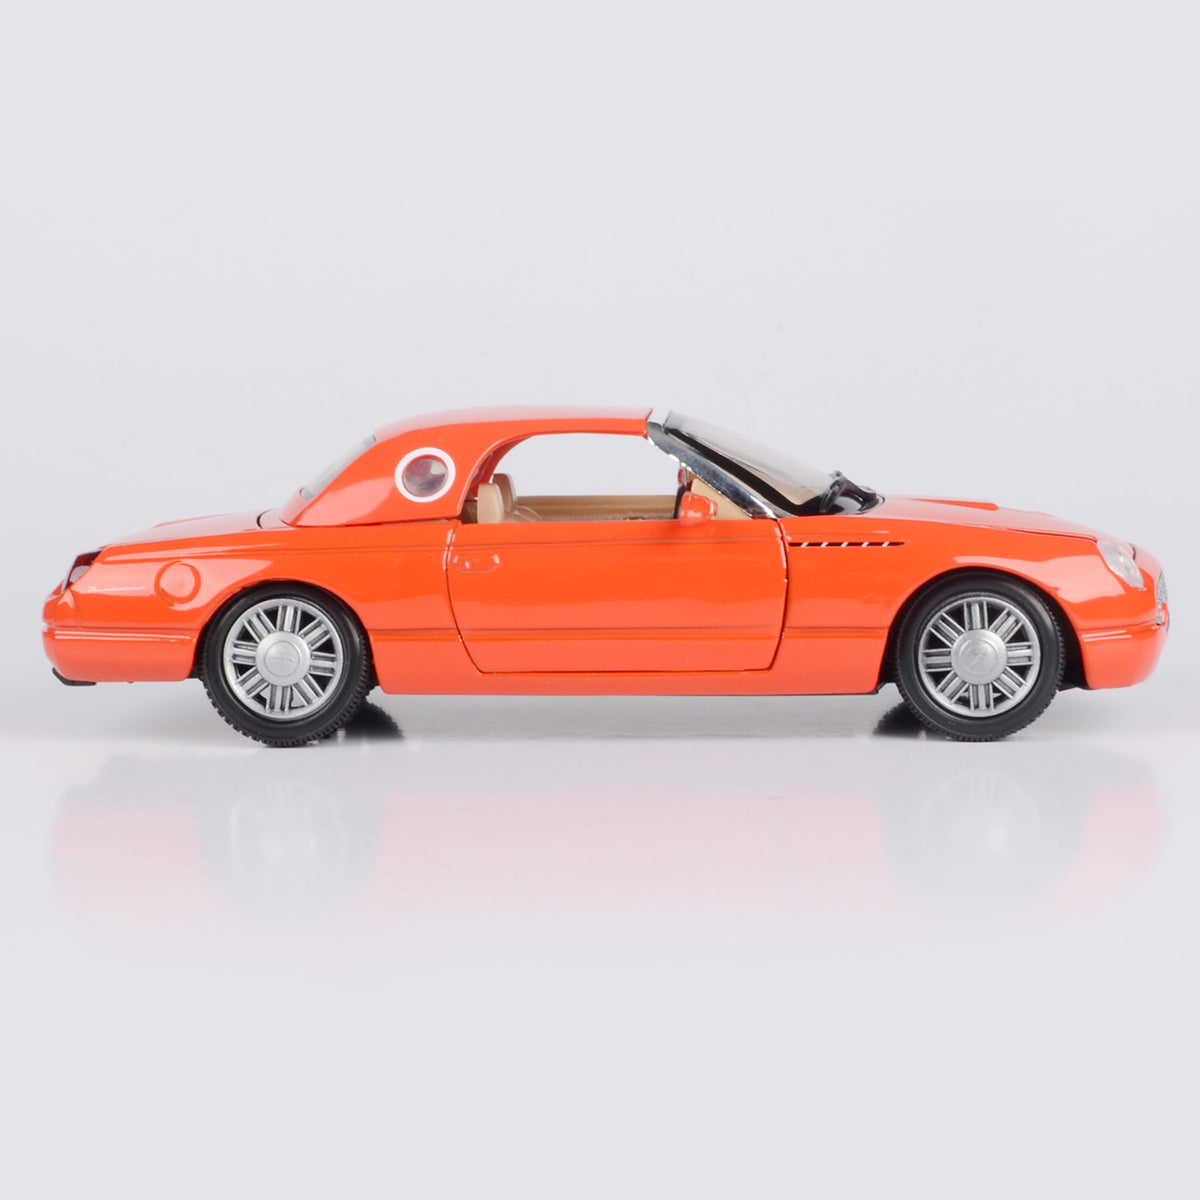 James Bond Ford Thunderbird Model Car - Die Another Day Edition - By Motormax